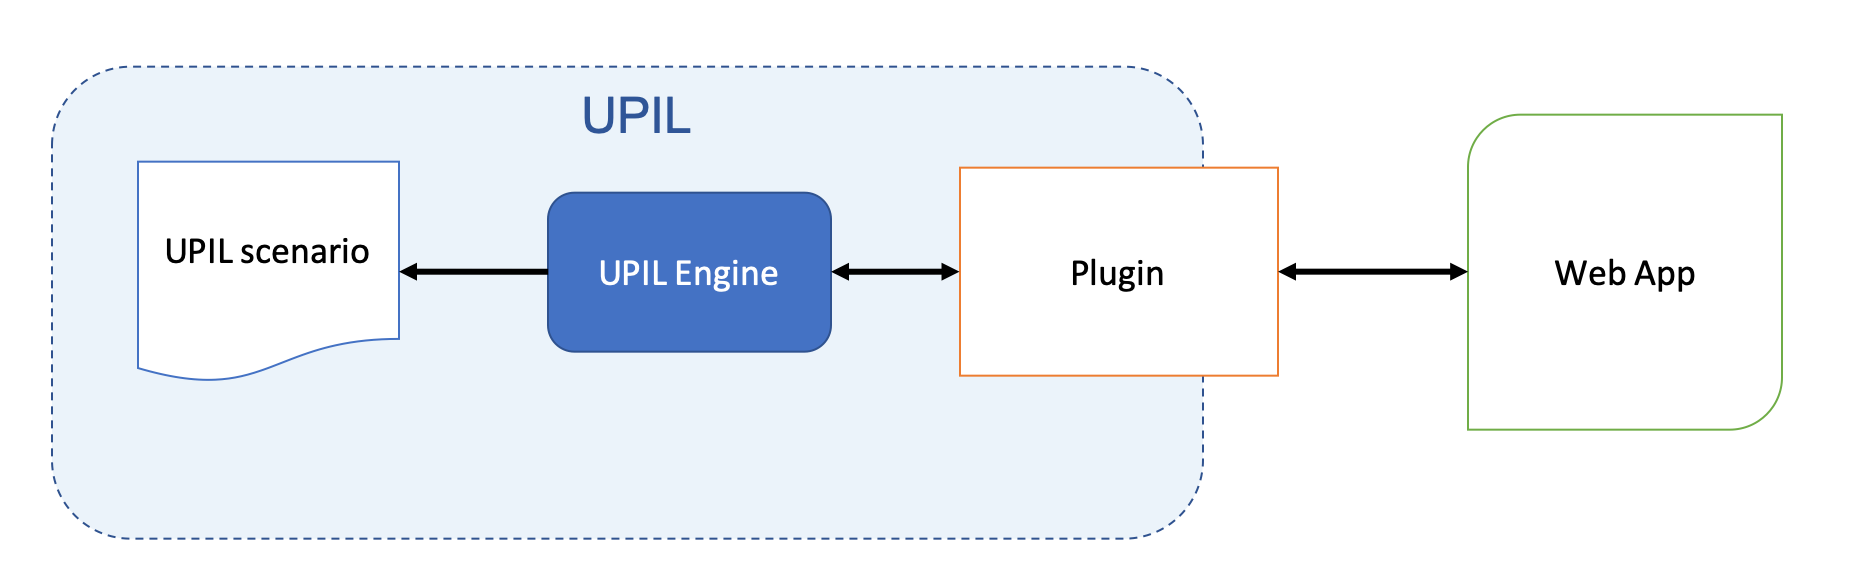 UPIL Architecture Overview